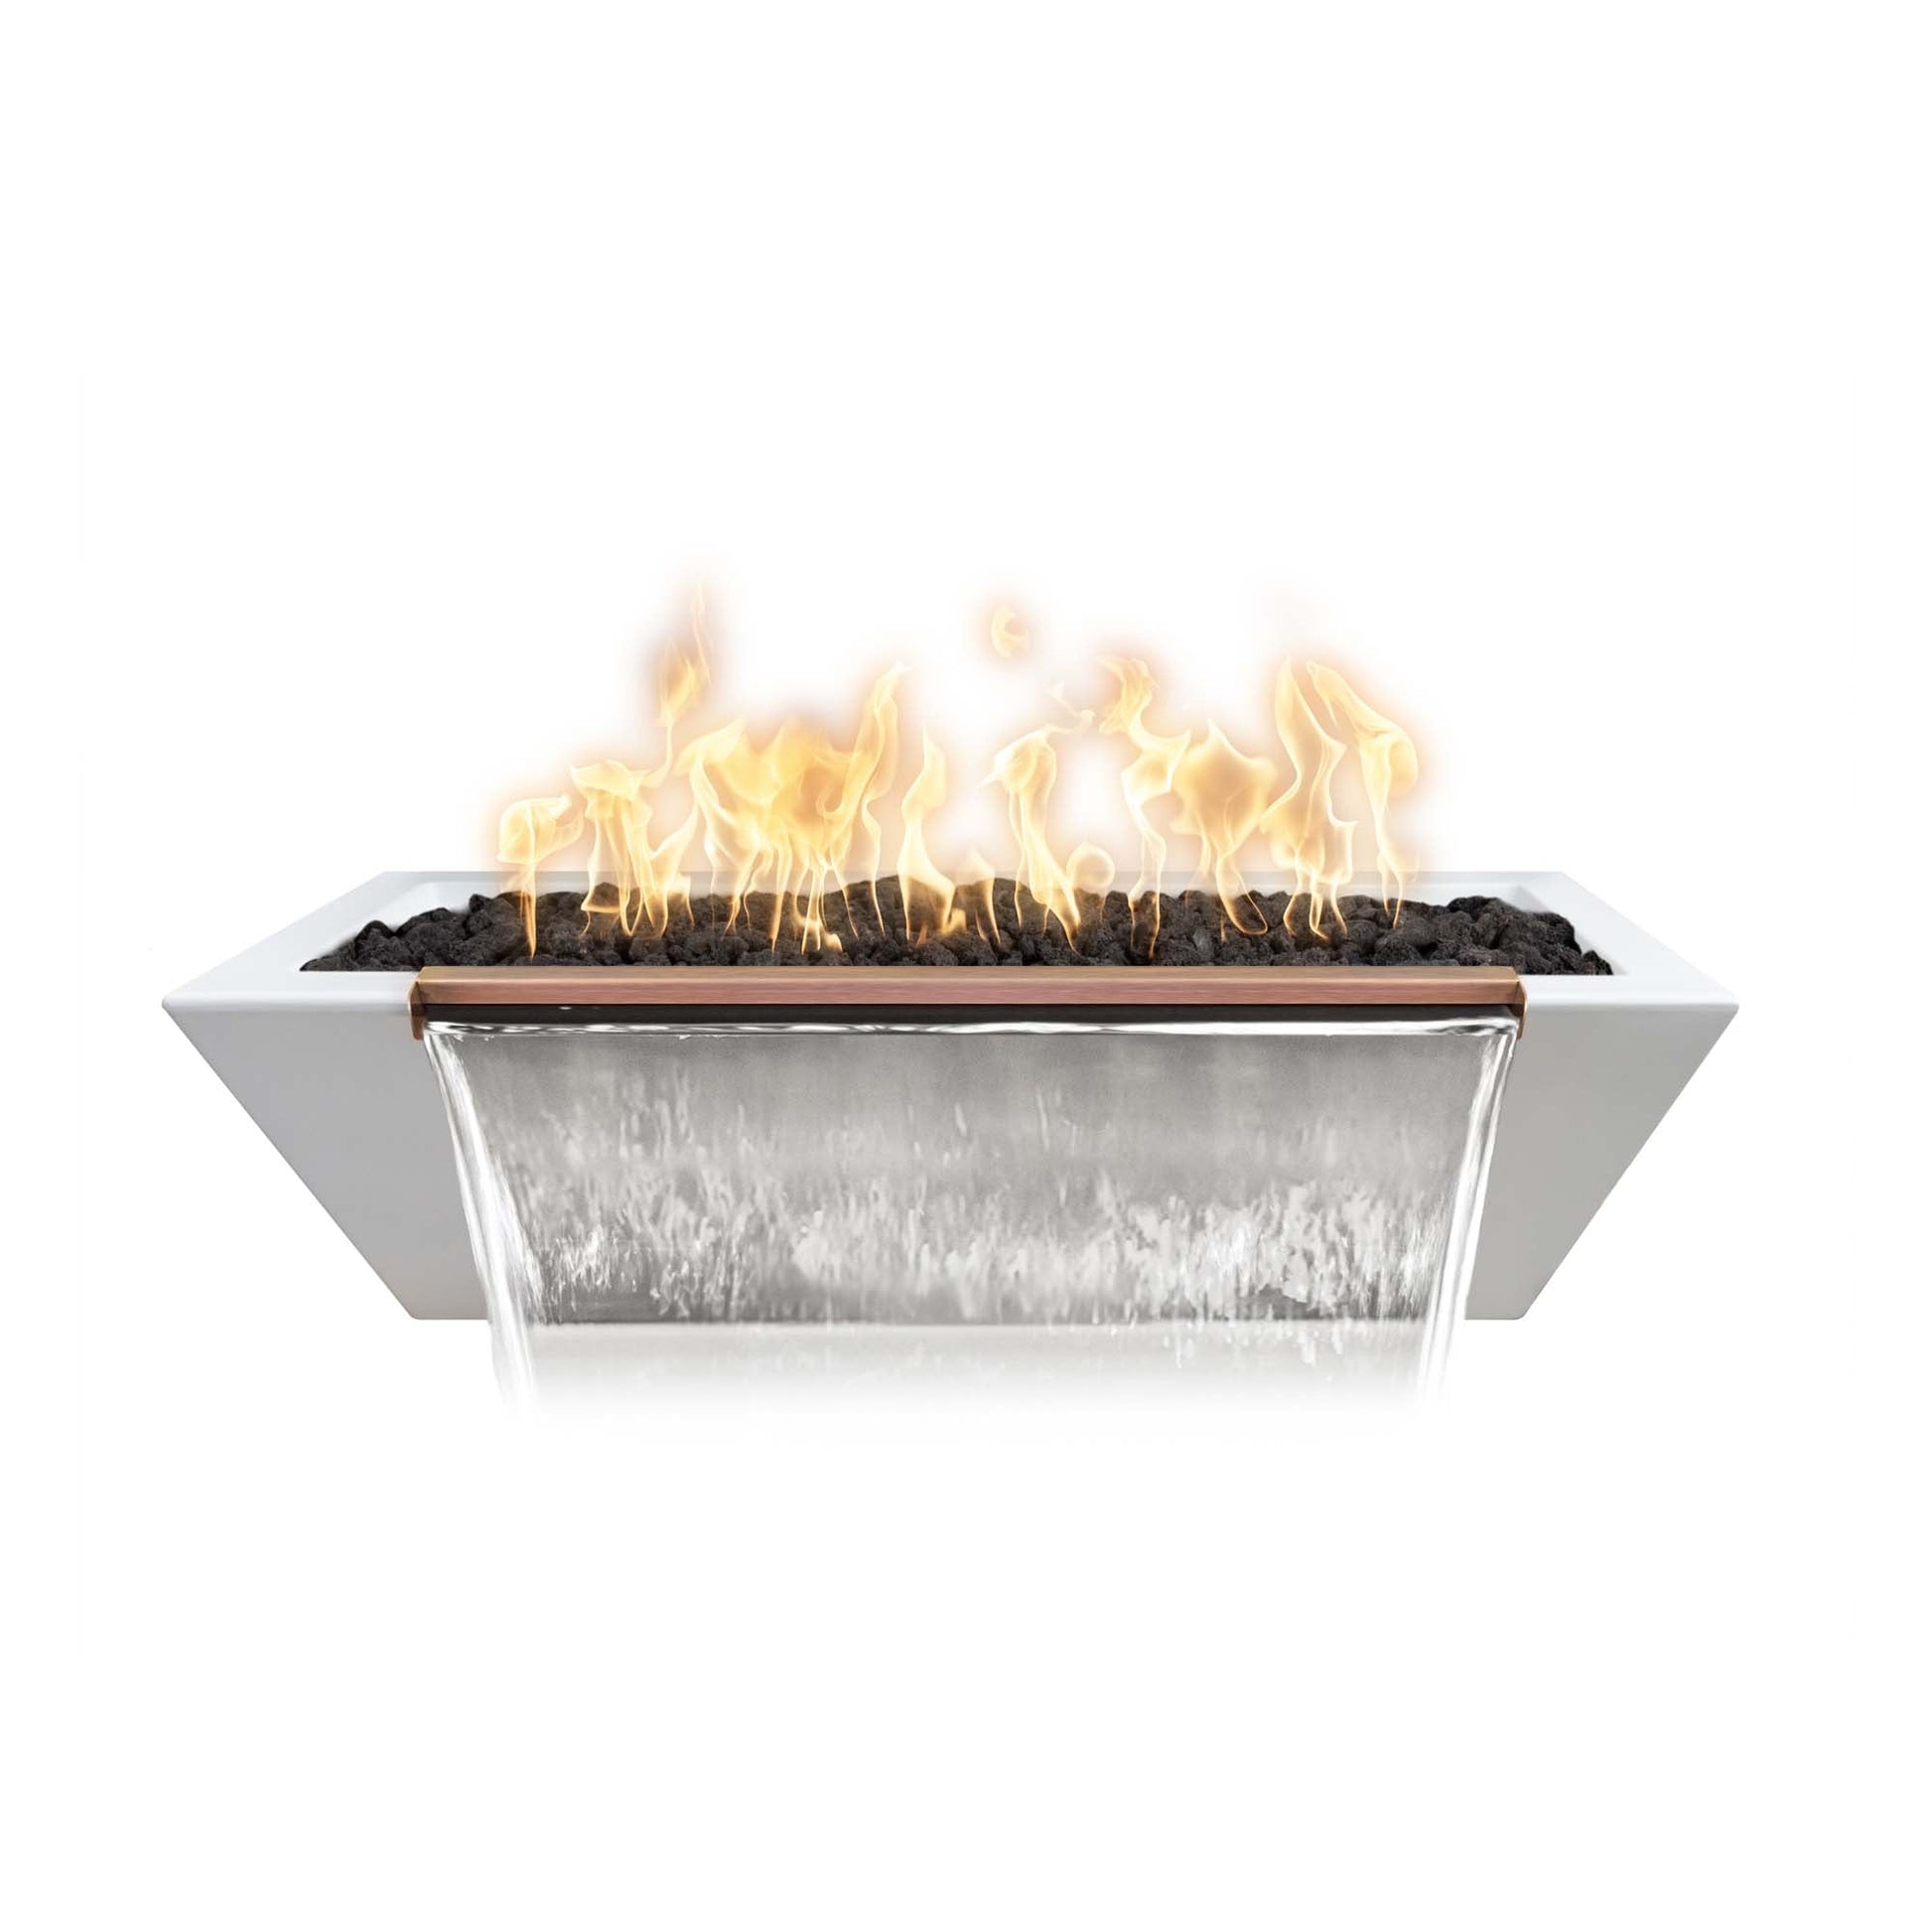 The Outdoor Plus Linear Maya 60" Black GFRC Concrete Liquid Propane Fire & Water Bowl with 12V Electronic Ignition